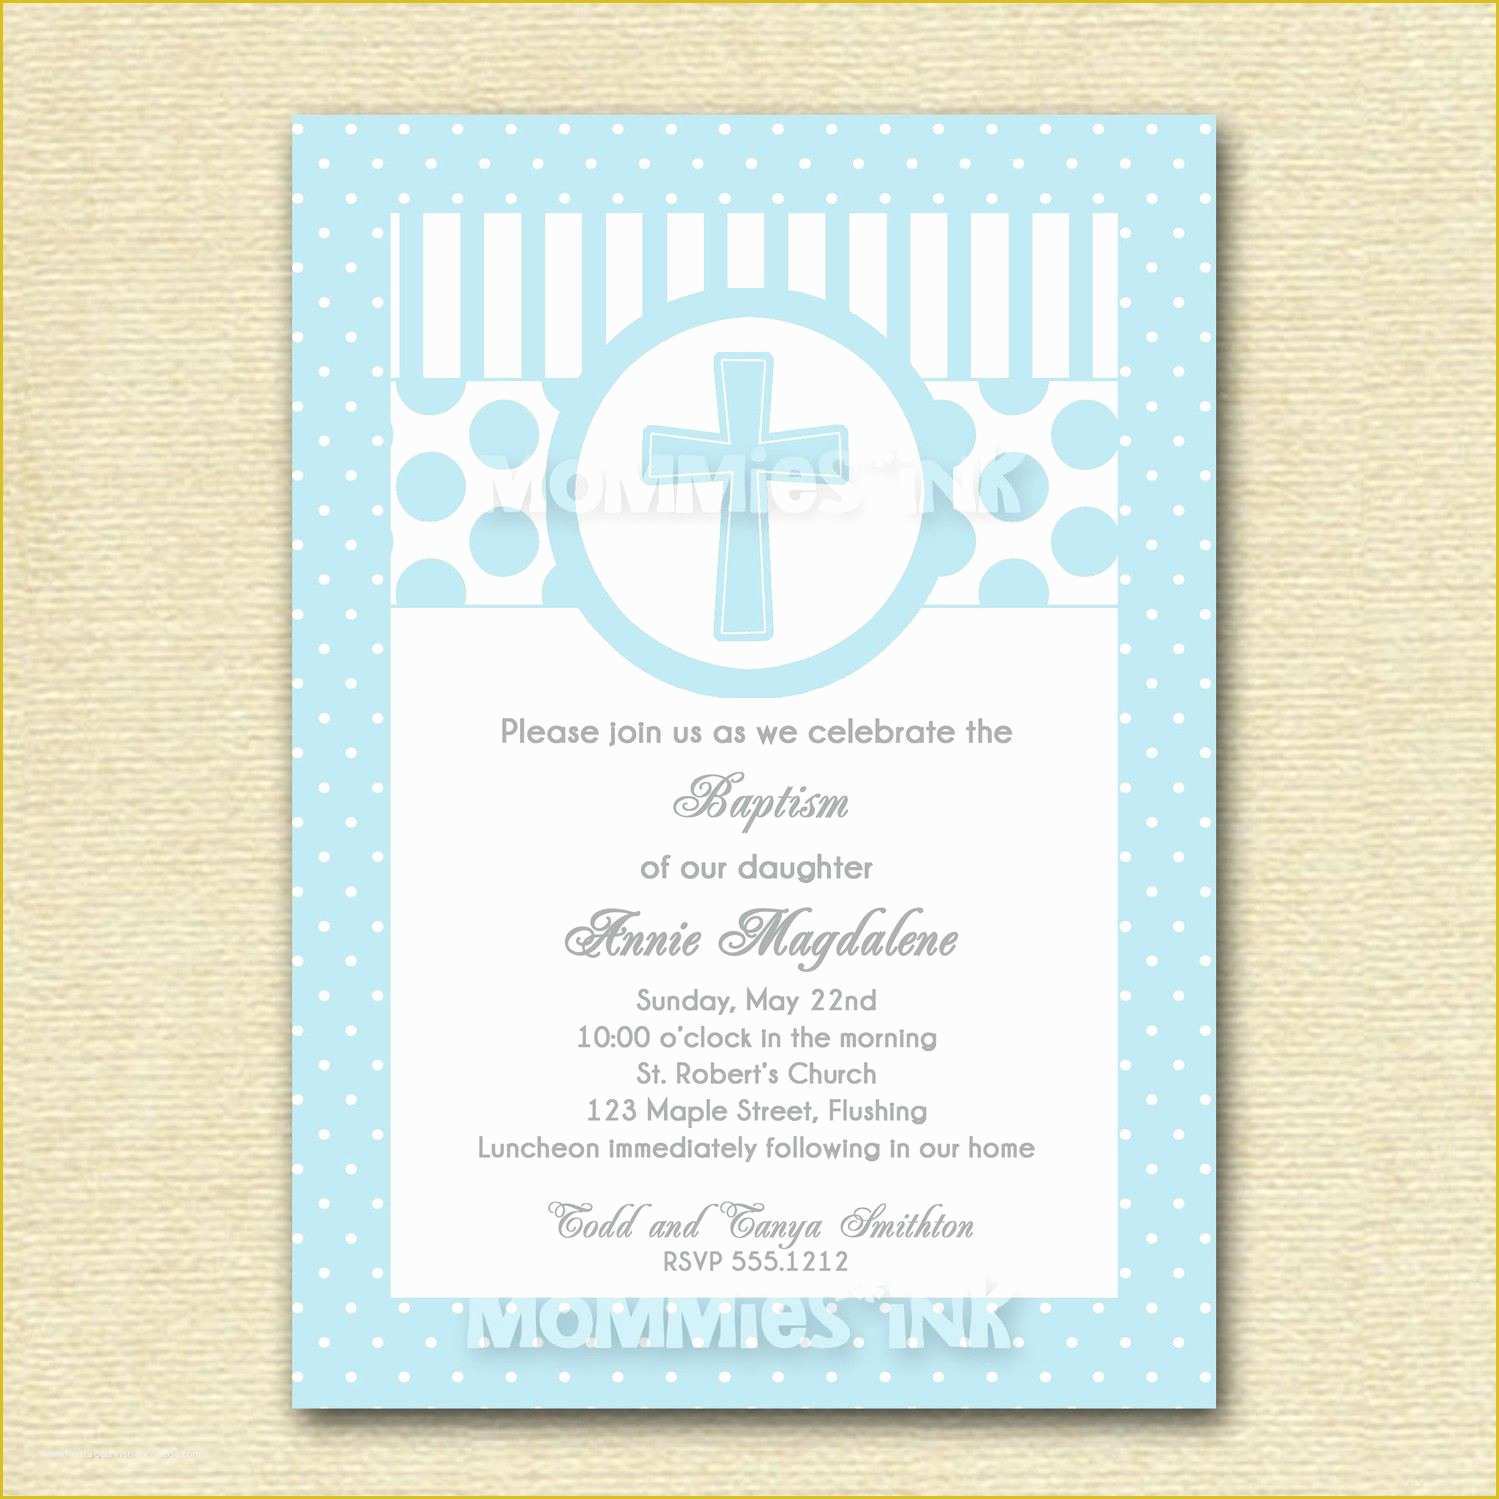 Baptism Invitation Template Free Download Of Baptism Invitations Templates Baptism Invitation